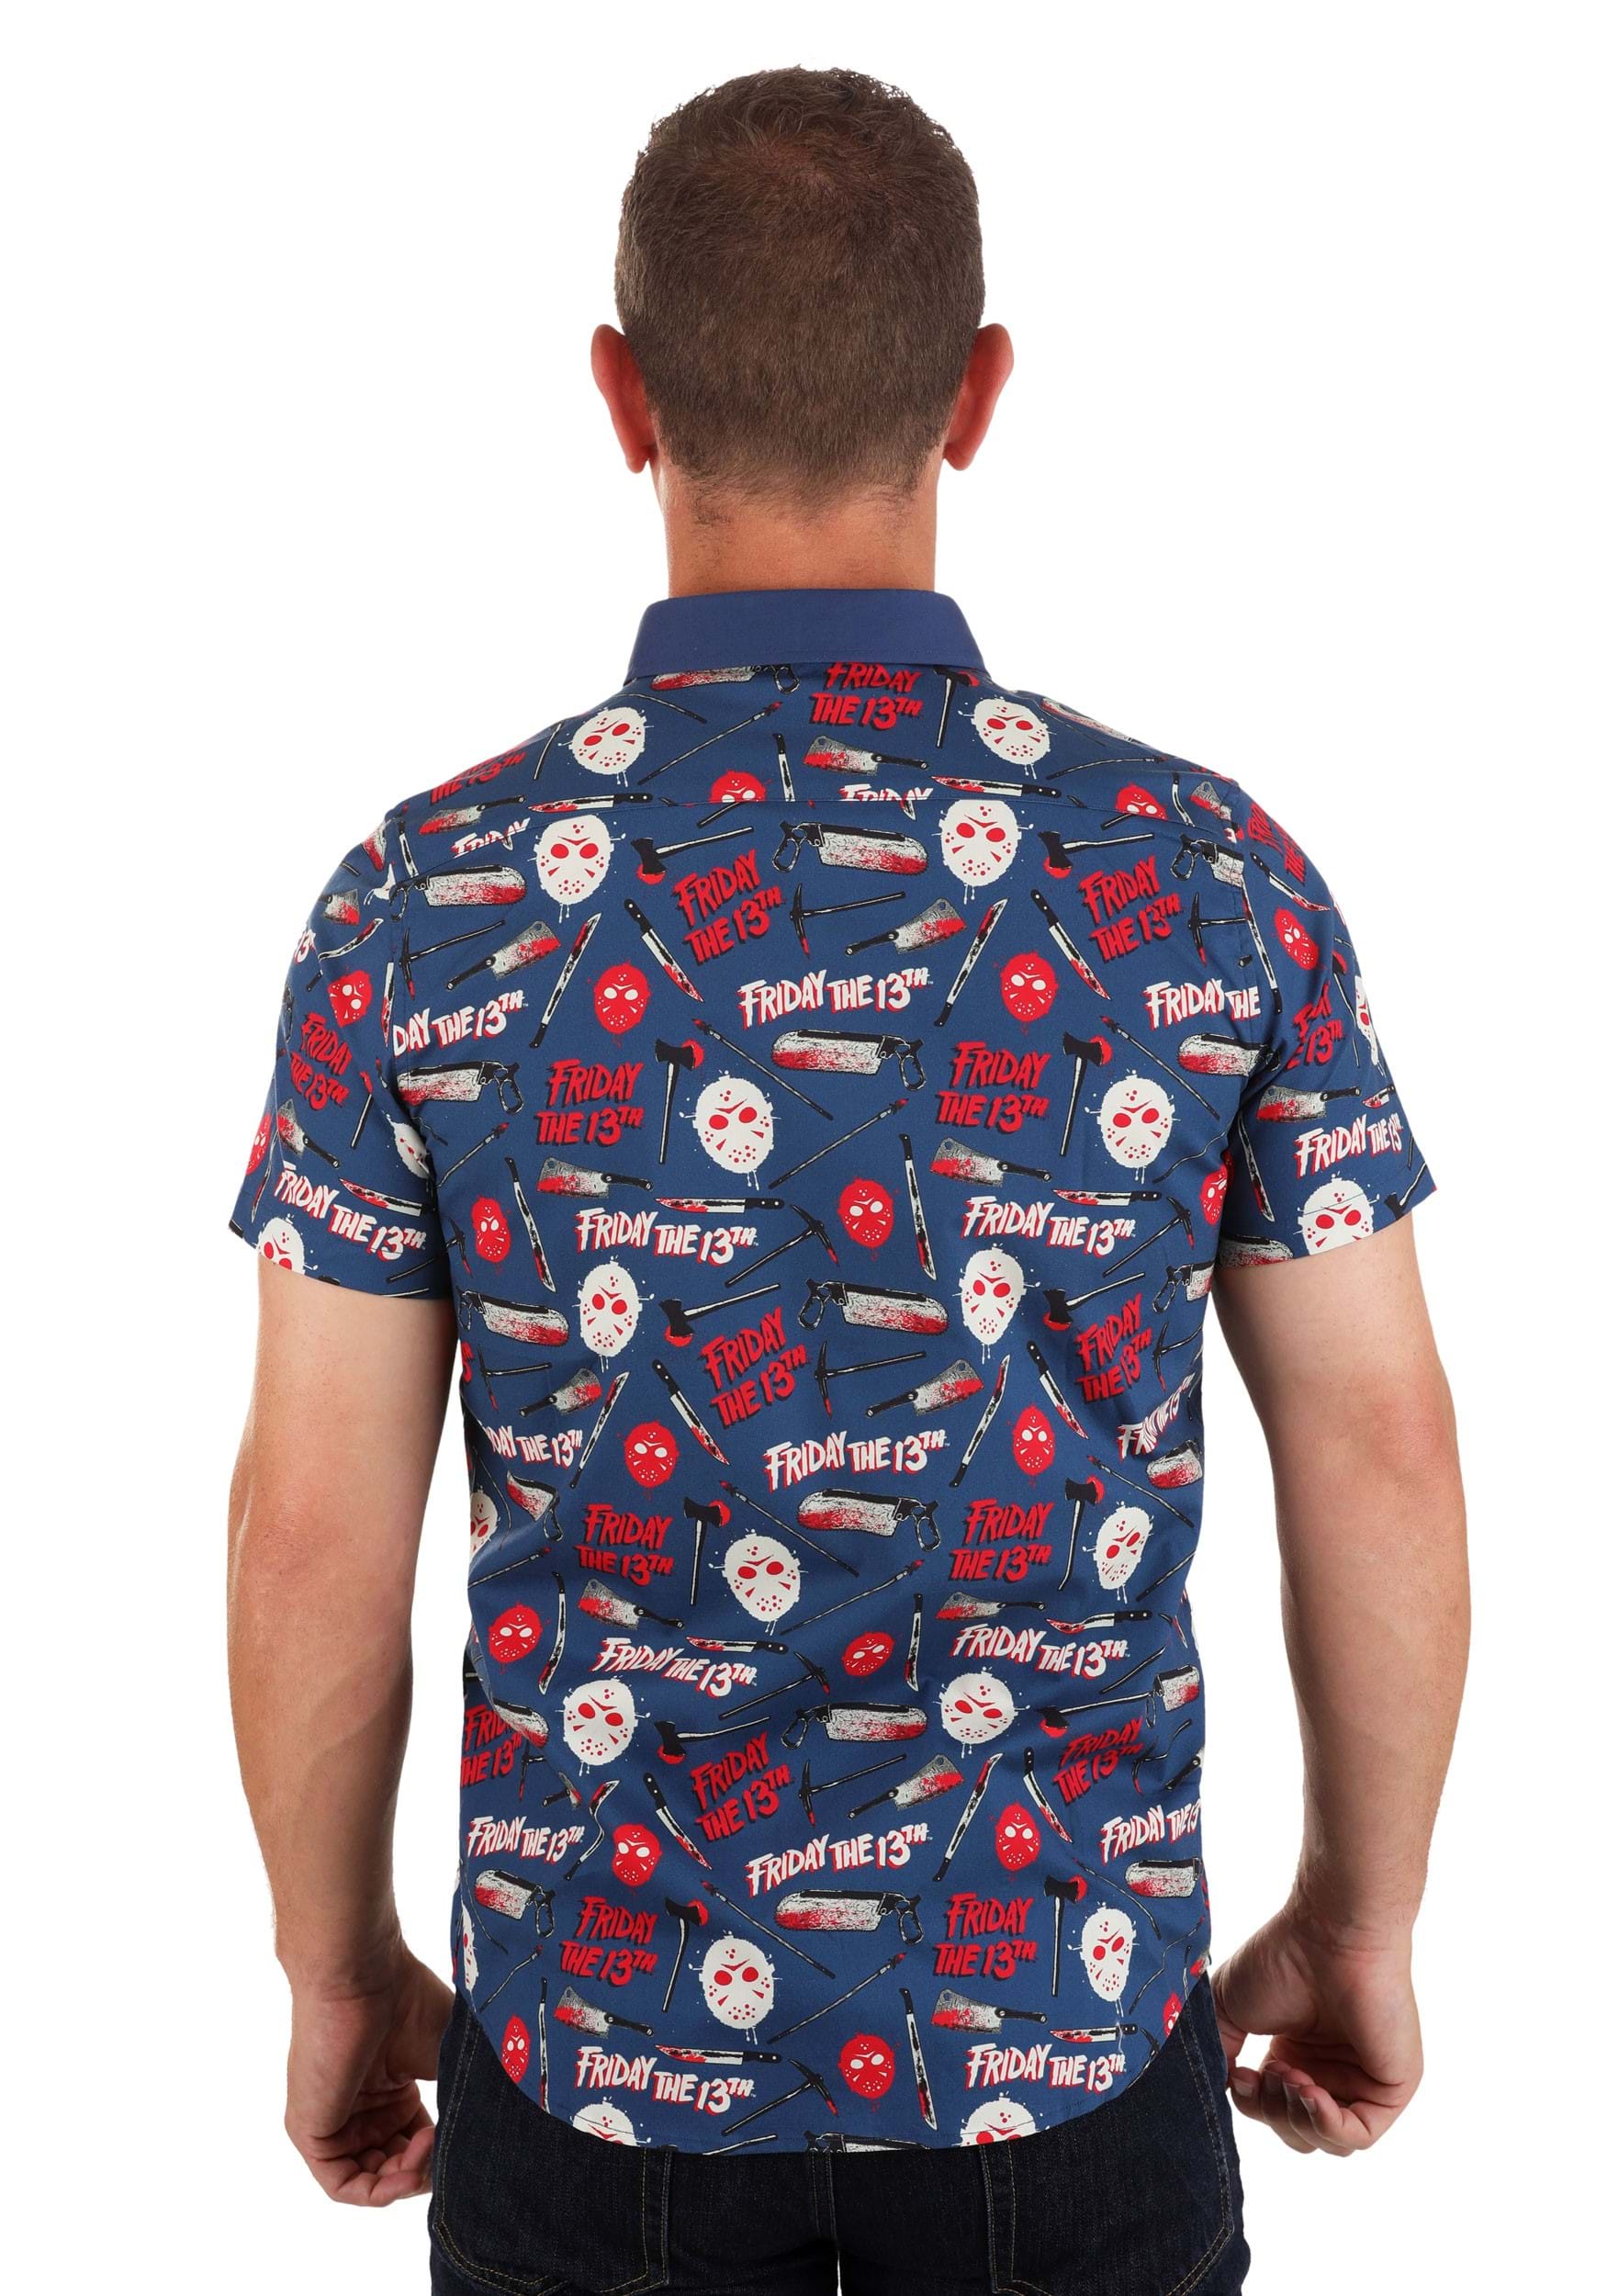 Thrills And Kills Friday The 13th Adult Button Up Shirt